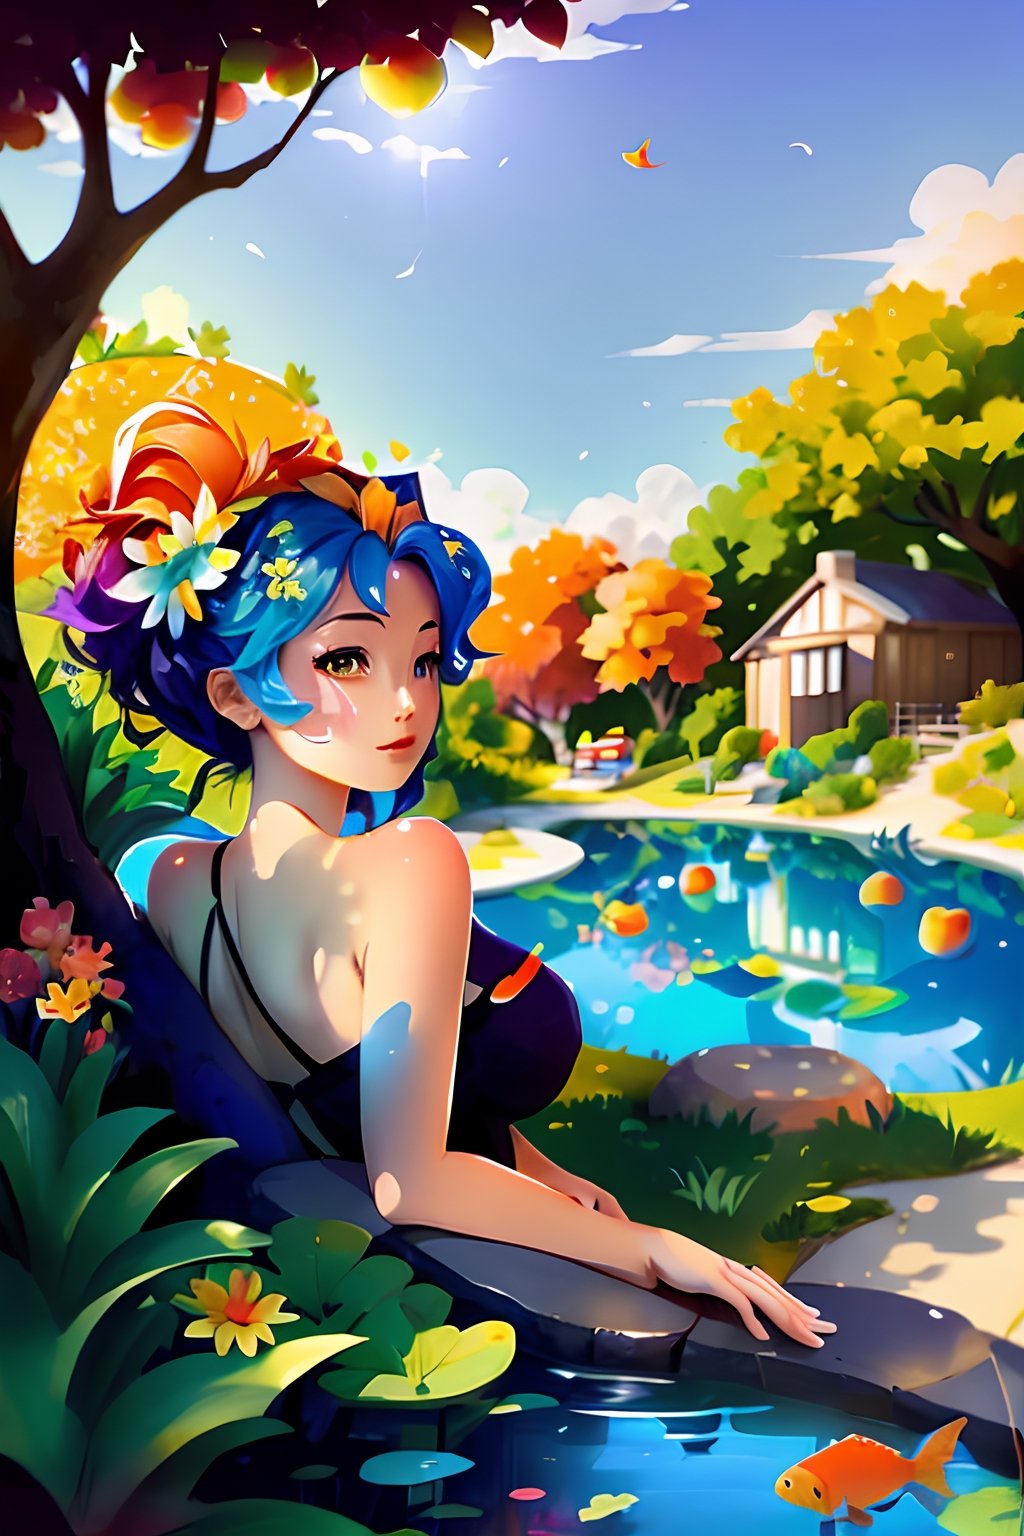  post00d, A beautiful woman with colorful hair made from flowers sat on a grassy knoll underneath an apple tree. The sky was blue and the sun shone brightly above her as she watched goldfish swim in a nearby pond